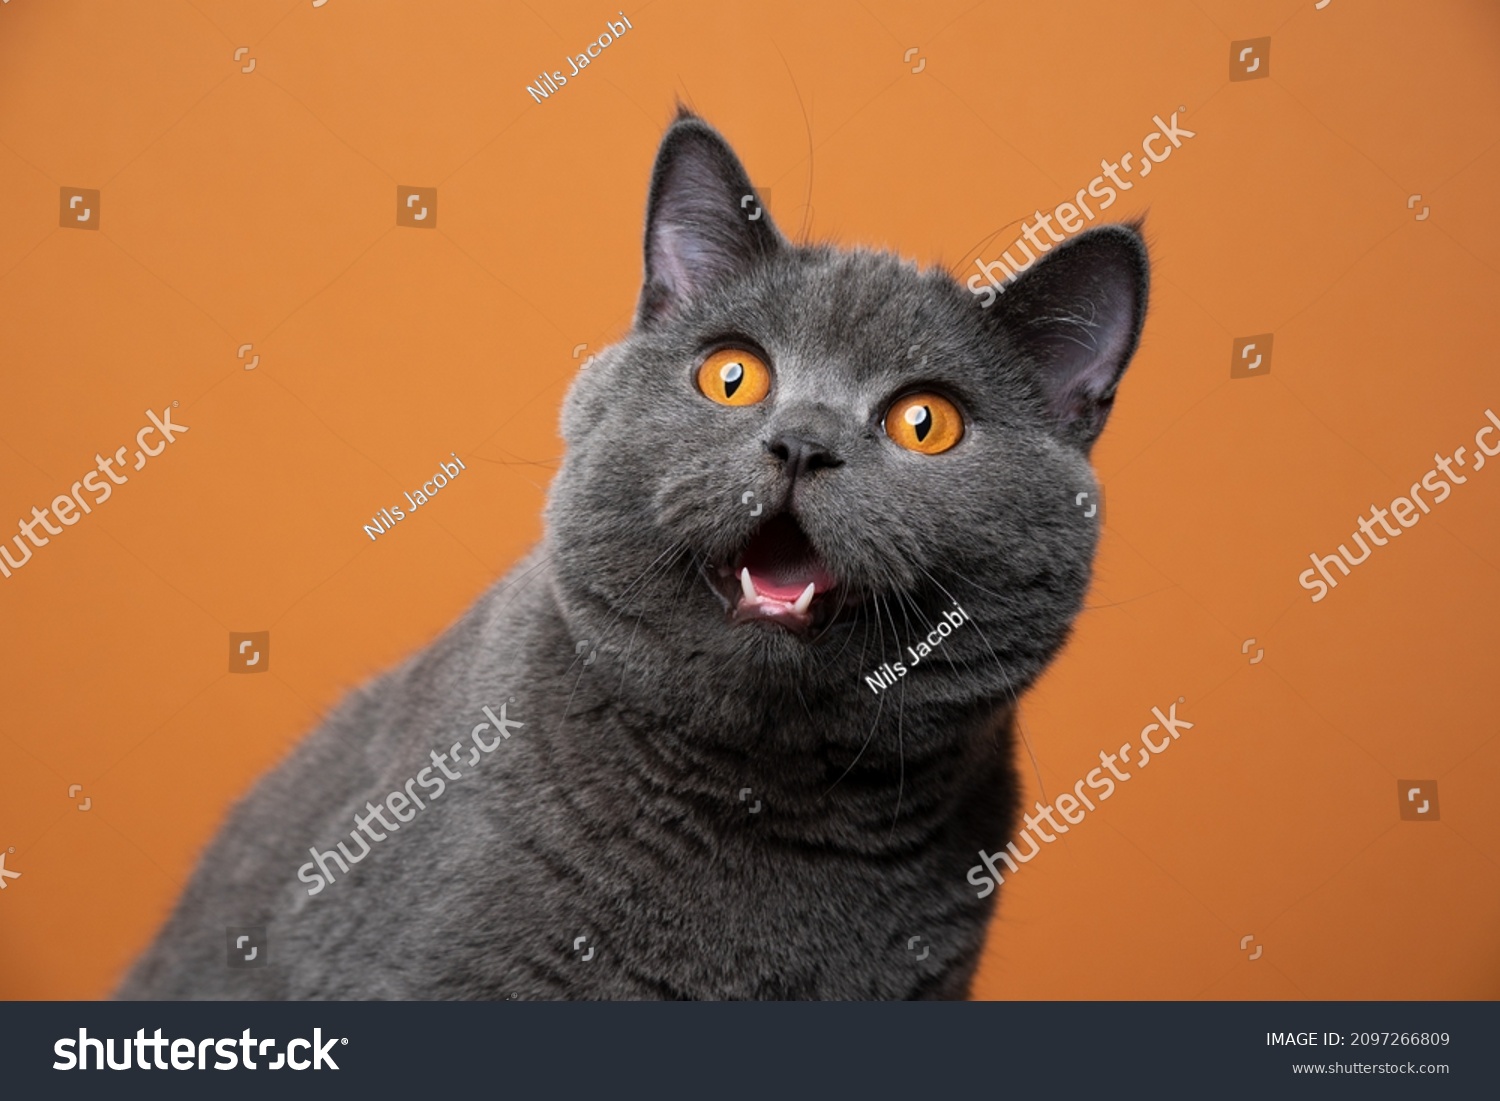 funny british shorthair cat portrait looking shocked or surprised on orange background with copy space #2097266809